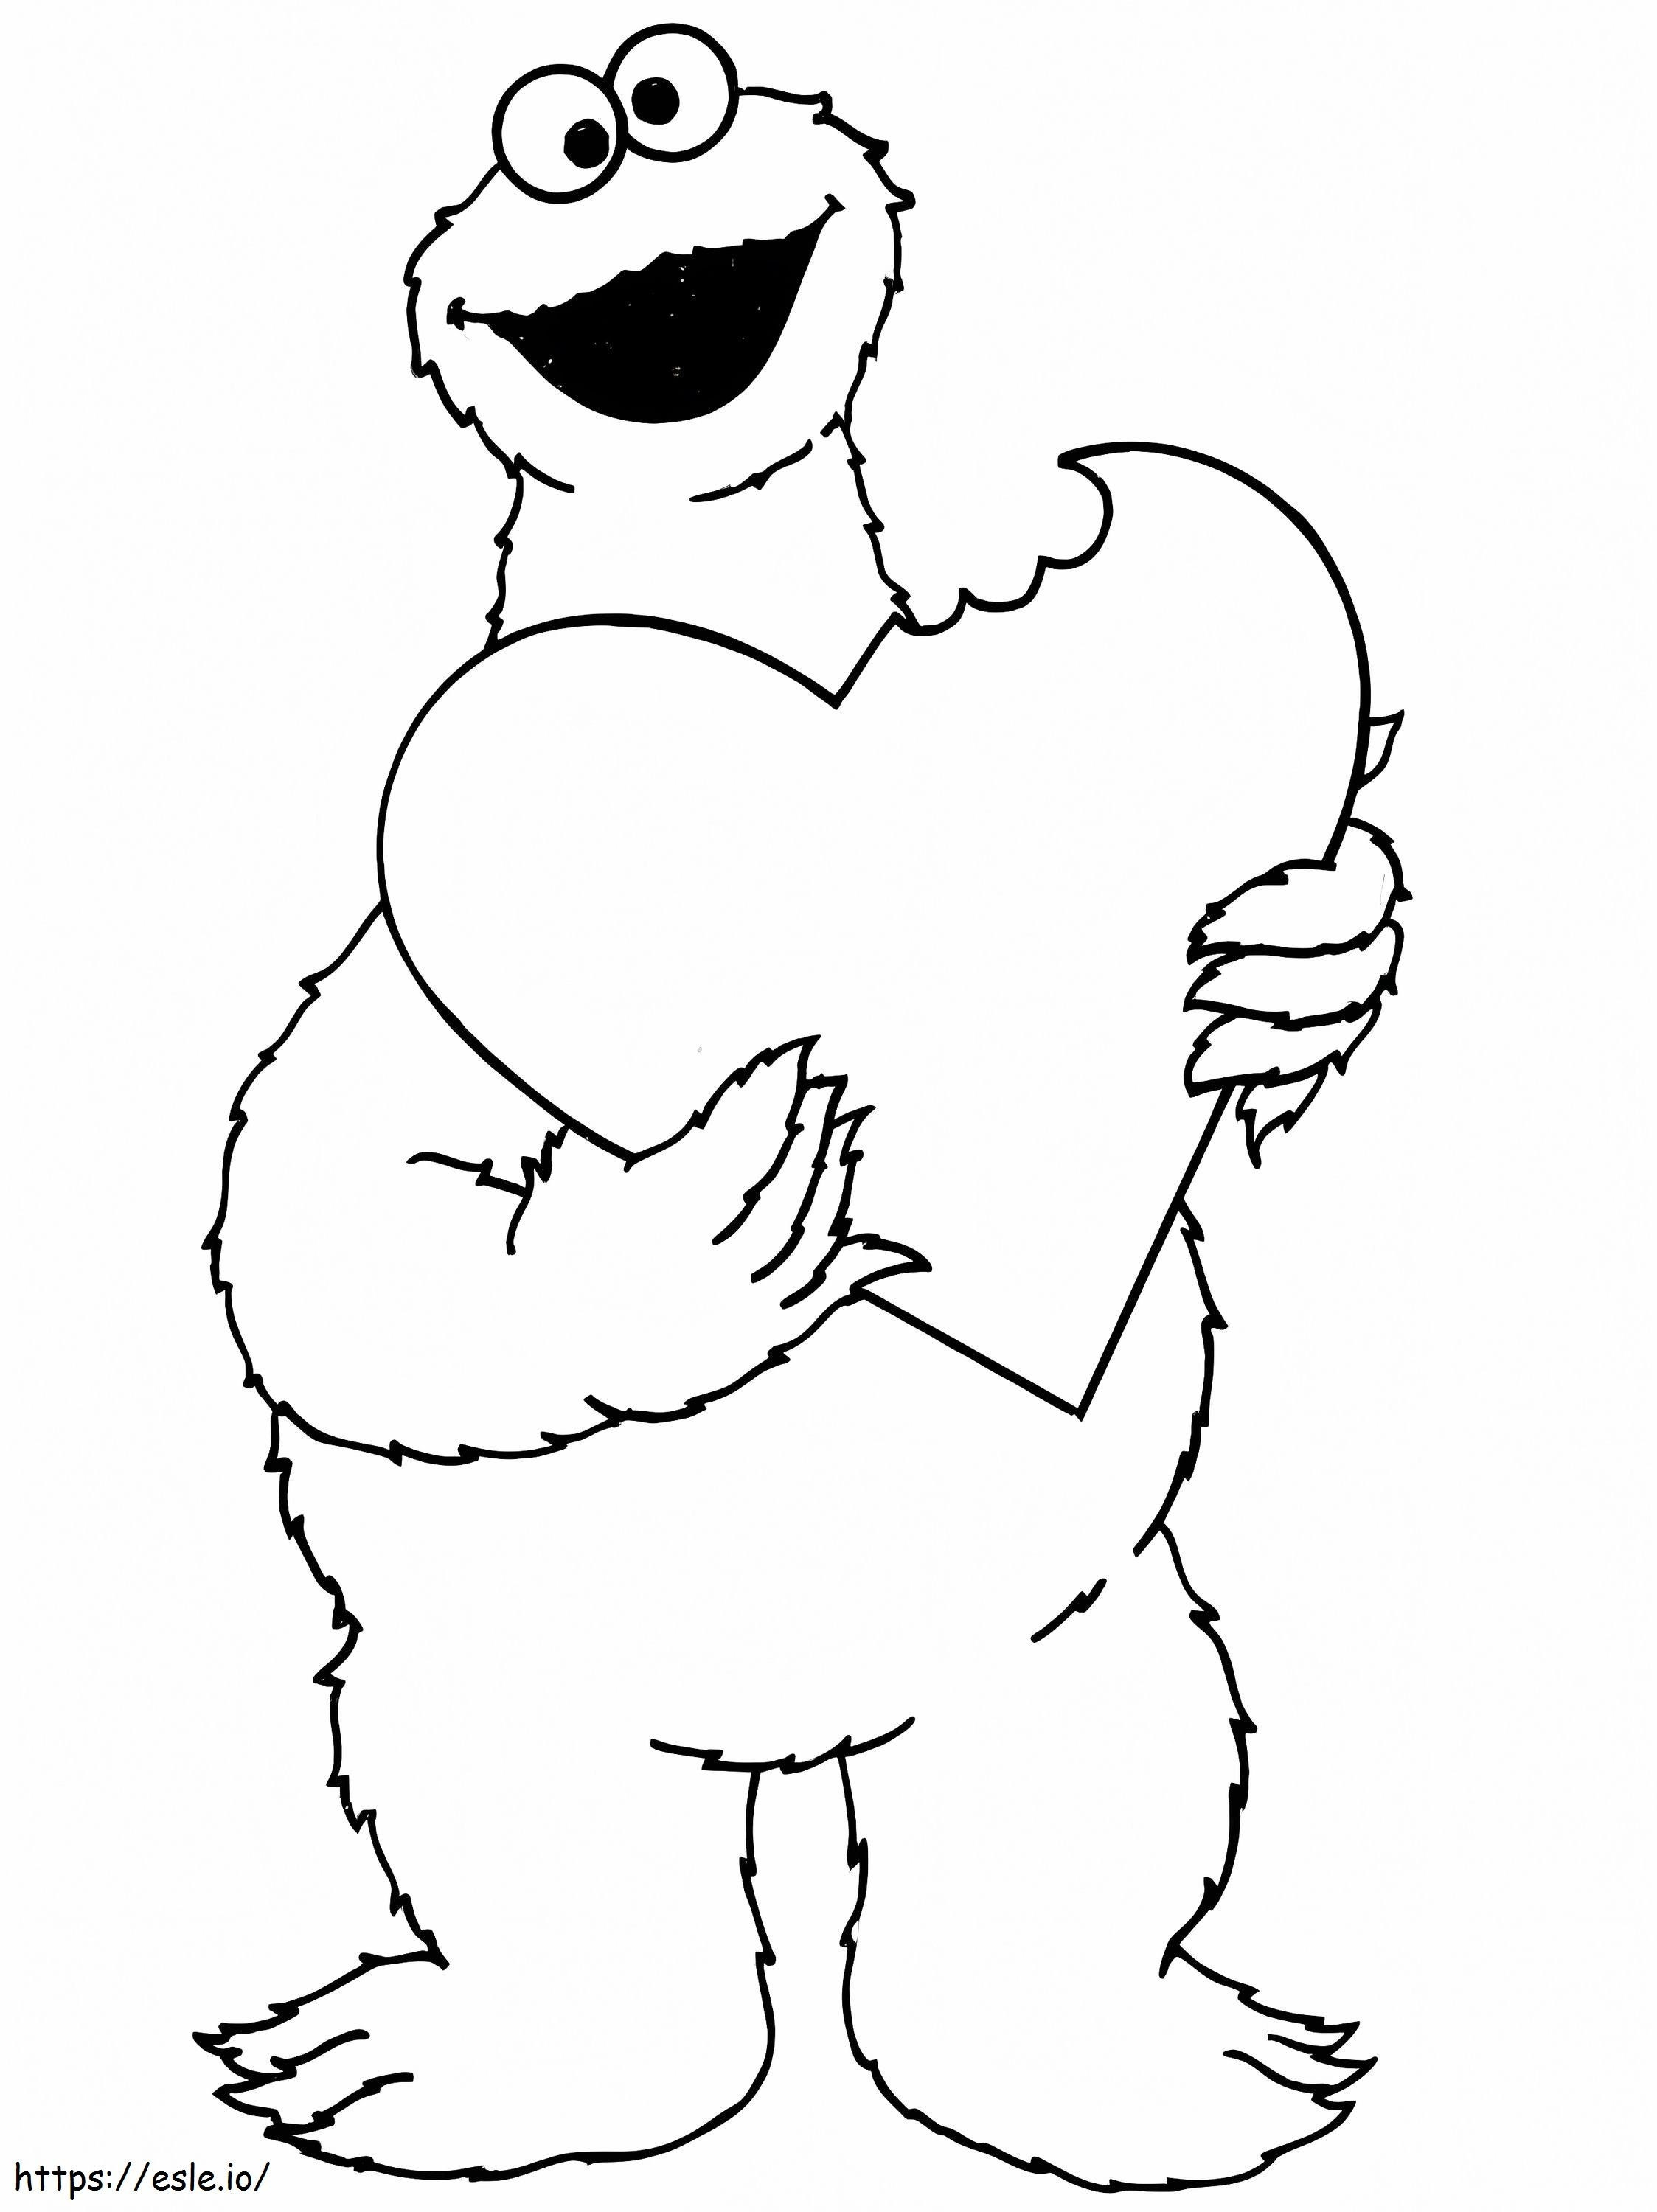 Cookie Monster With Heart Cookie coloring page